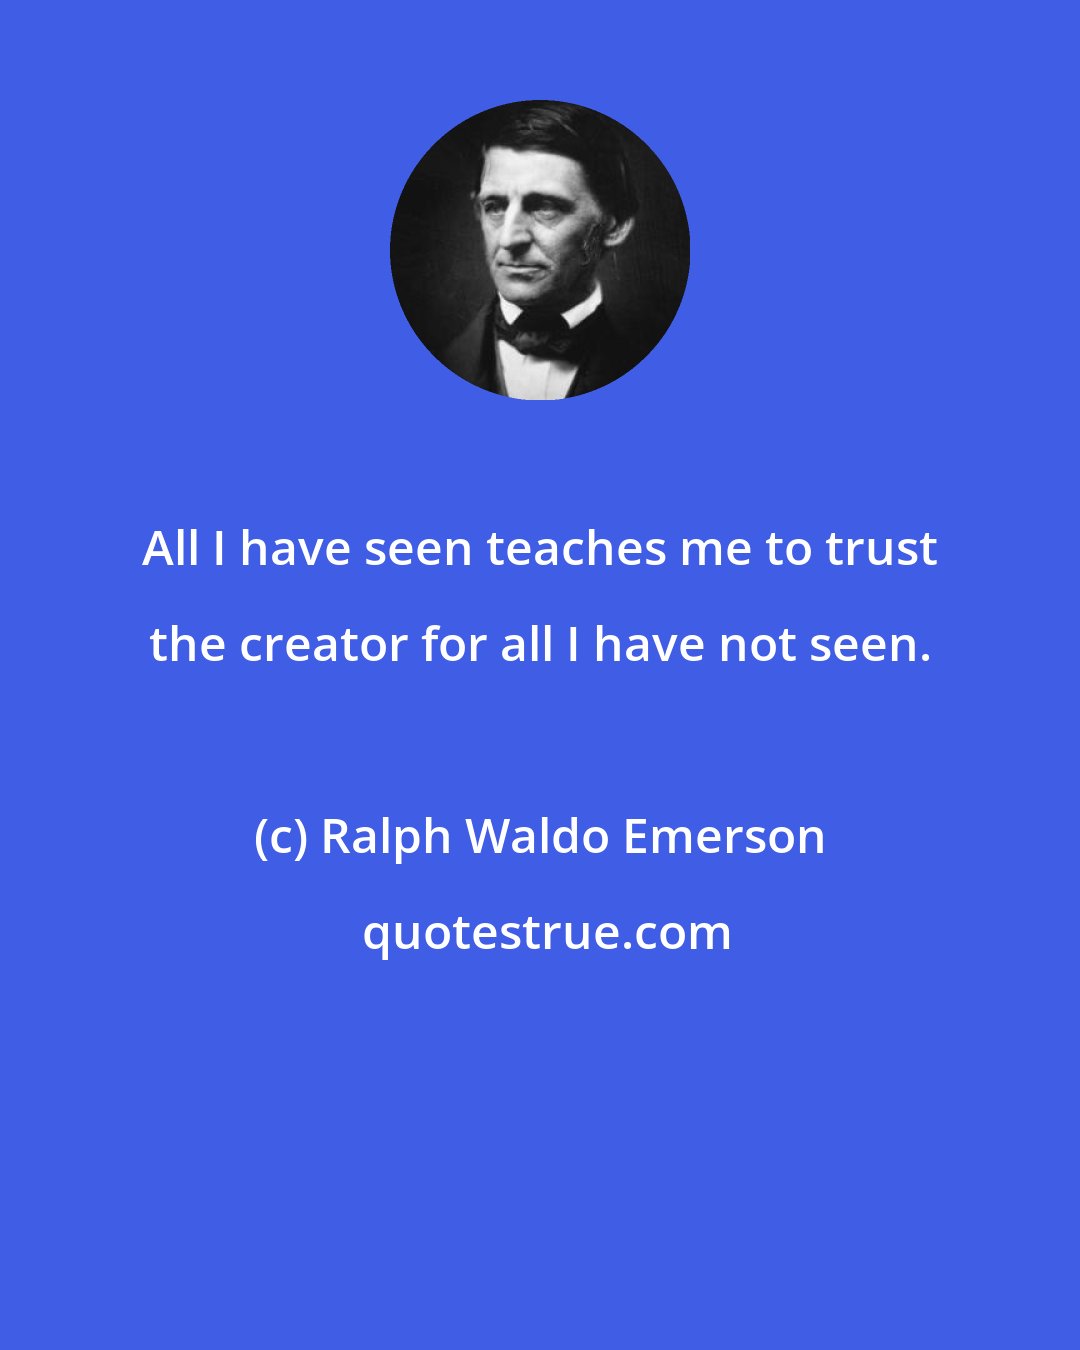 Ralph Waldo Emerson: All I have seen teaches me to trust the creator for all I have not seen.